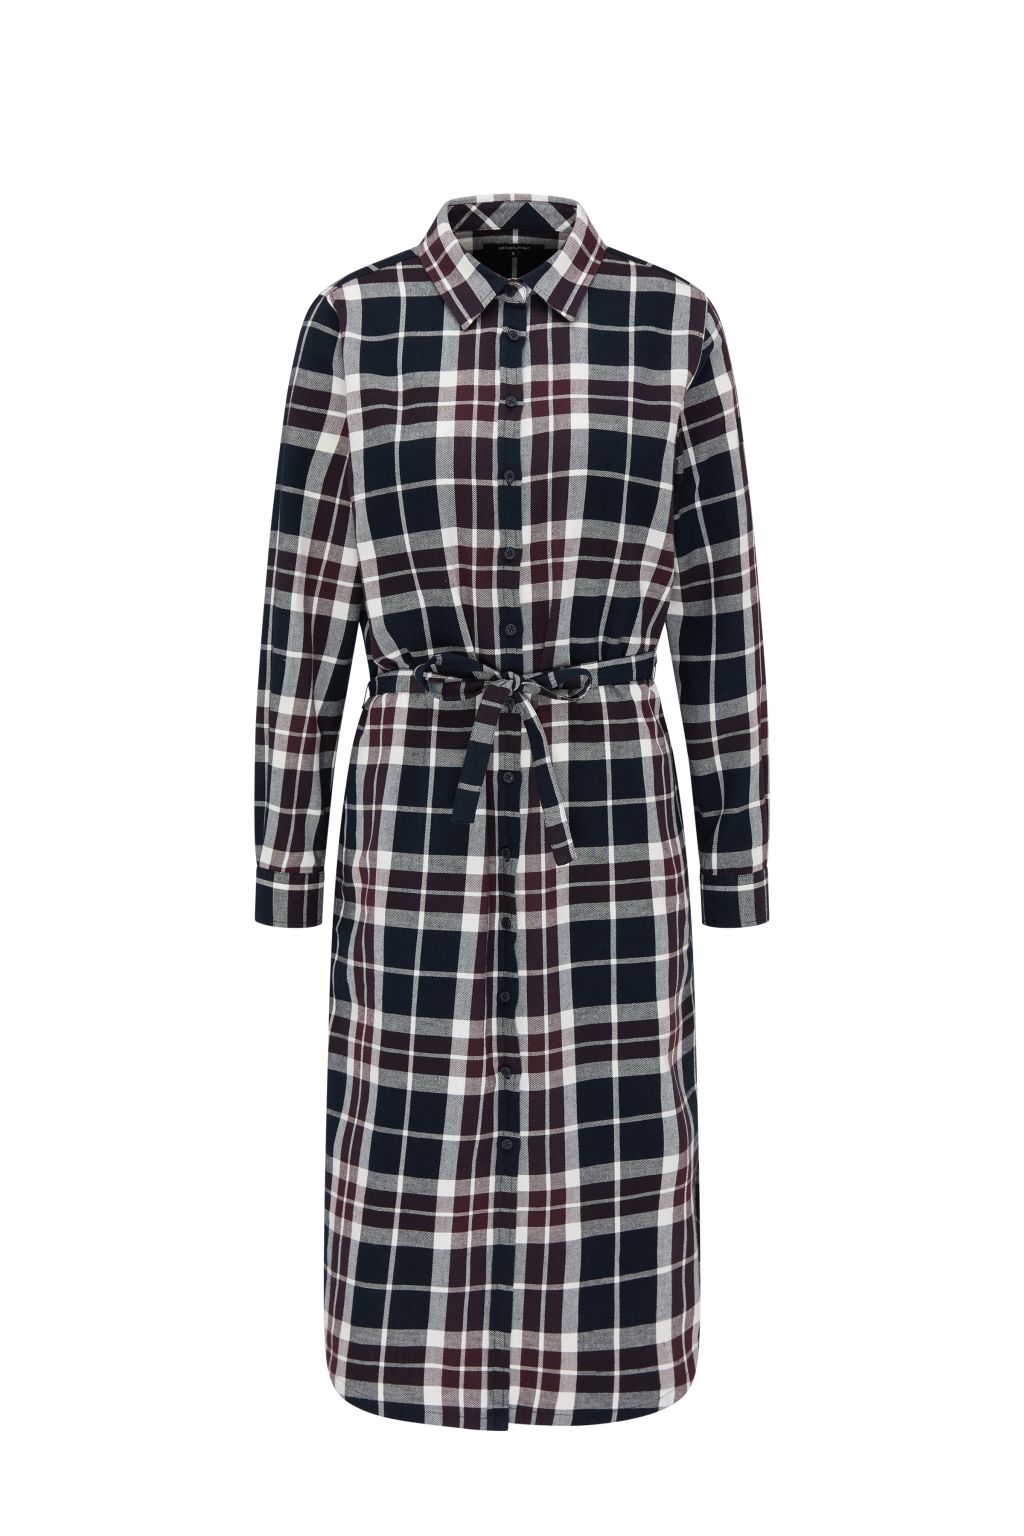 Frauen Flanell Dress #CHECKED red checked S